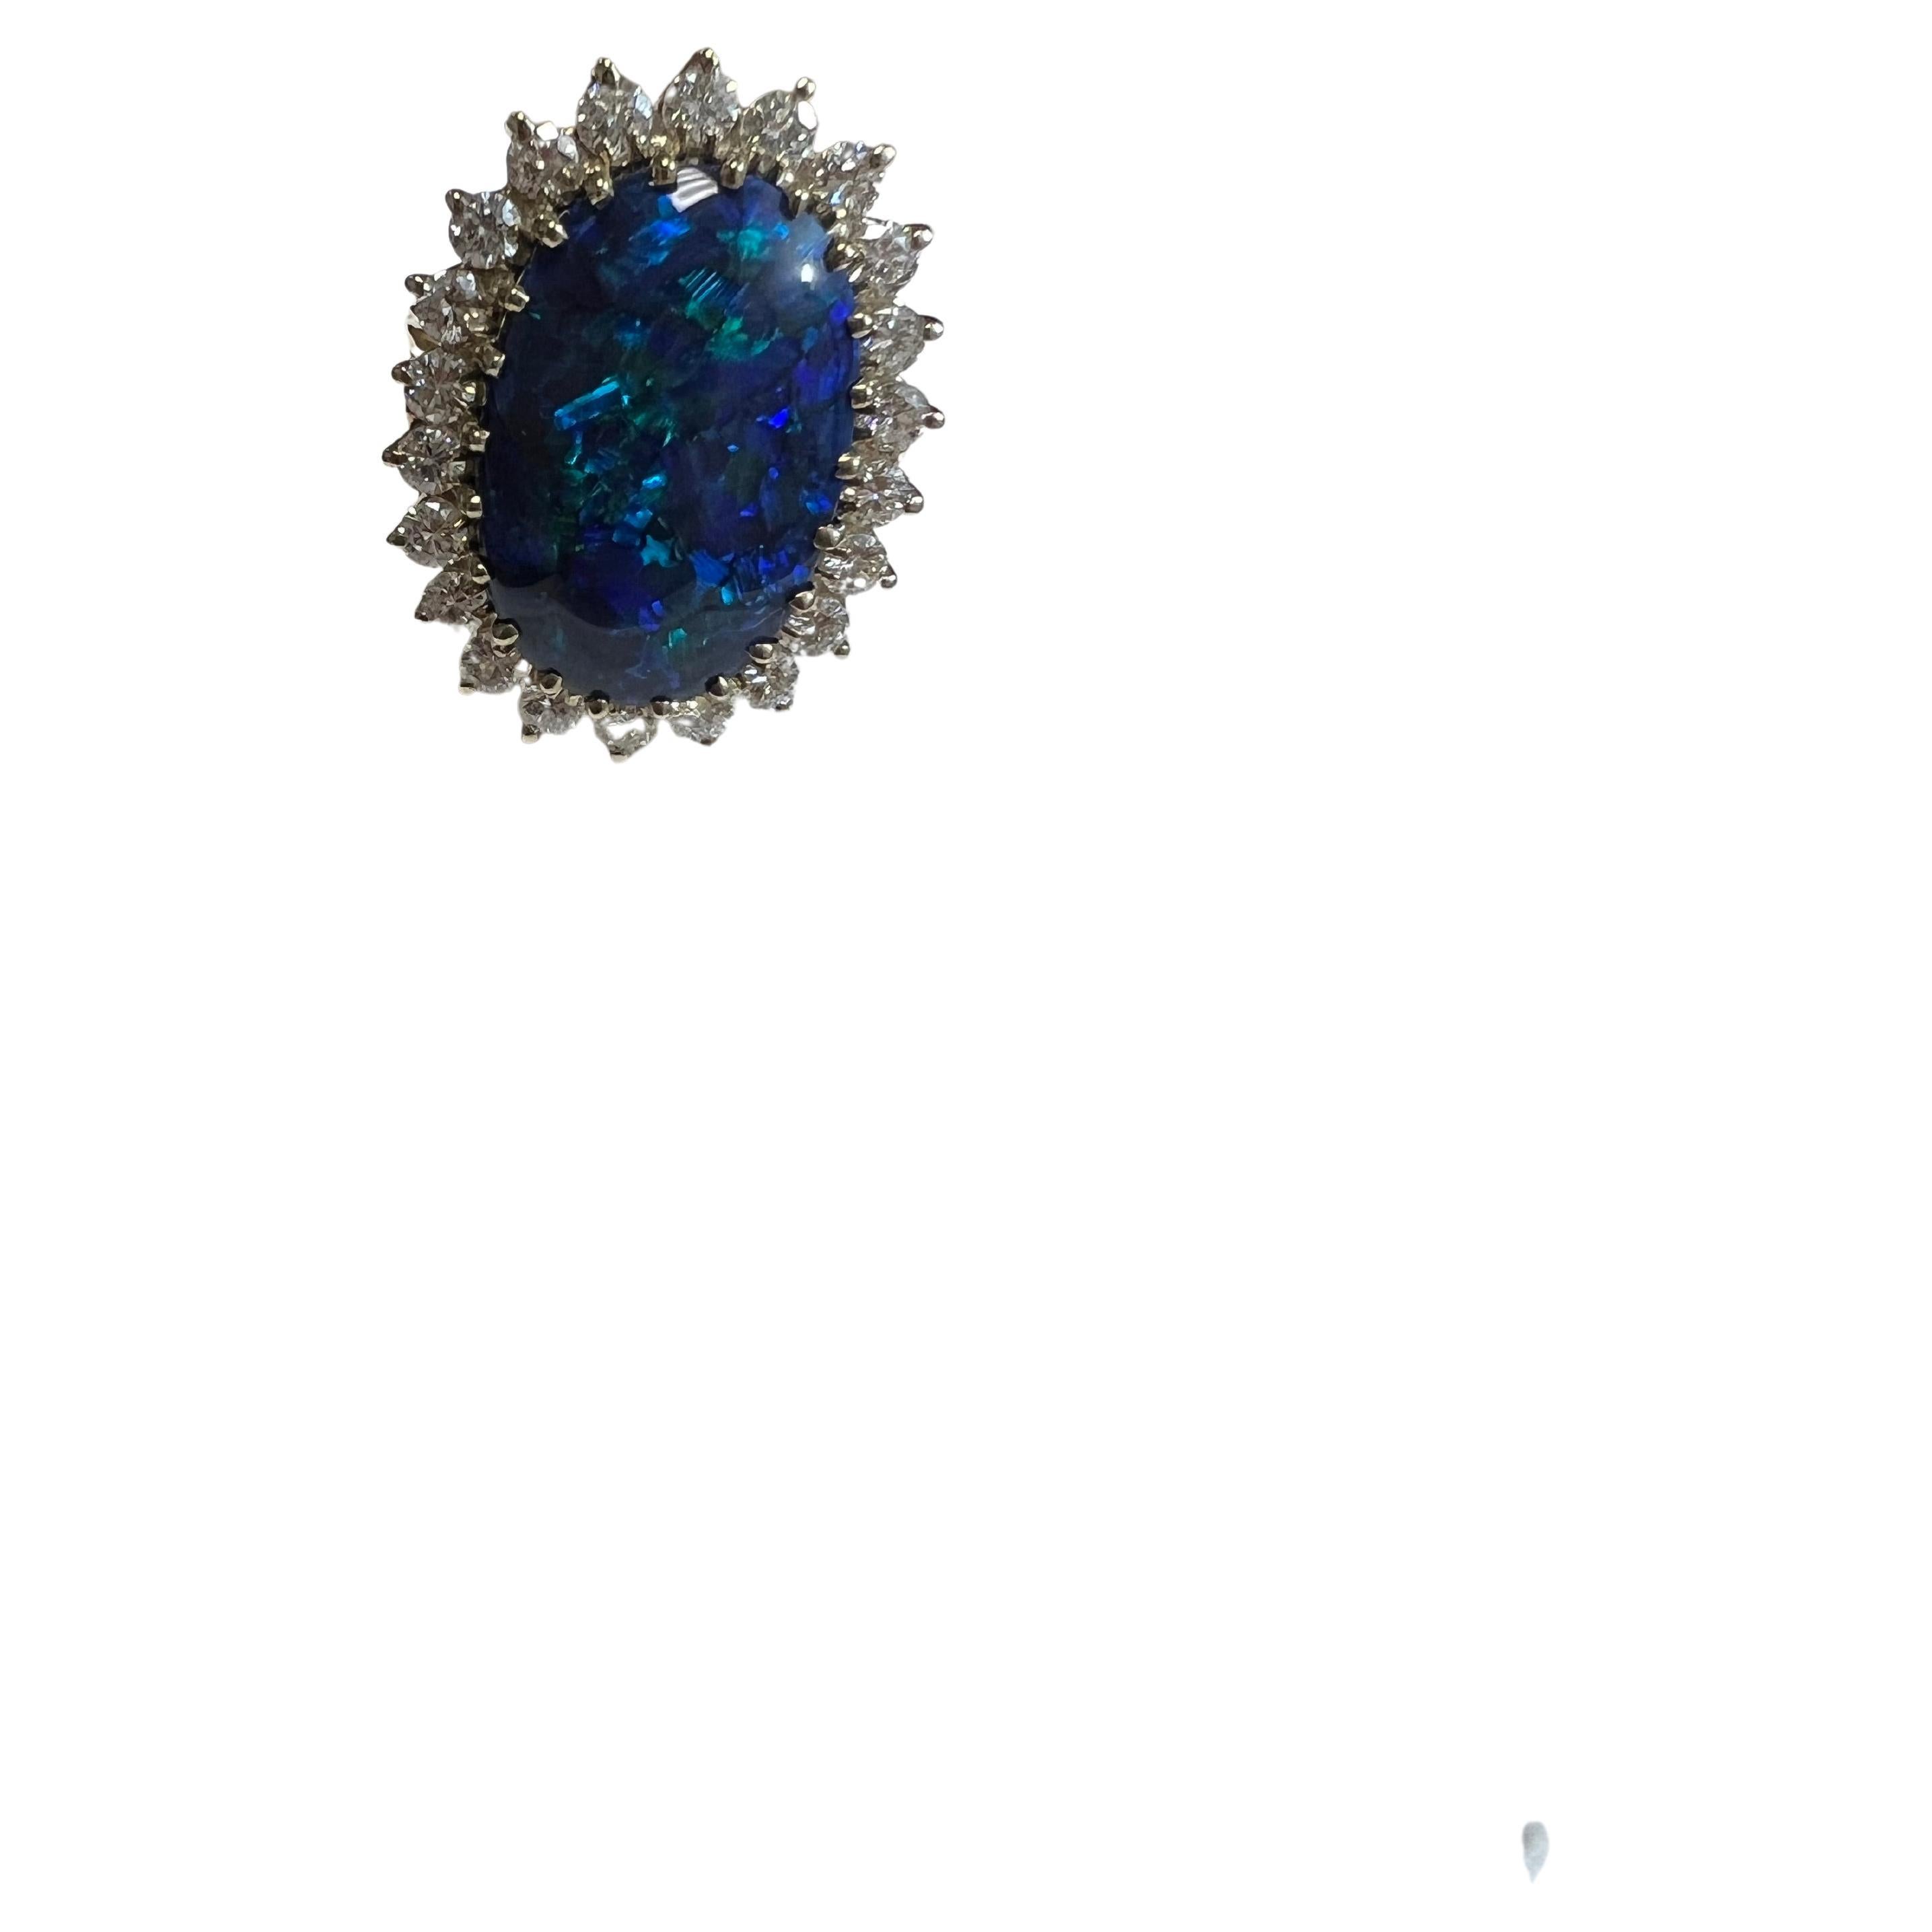 Lady's Black Opal and Diamonds Ring in 18k White Gold